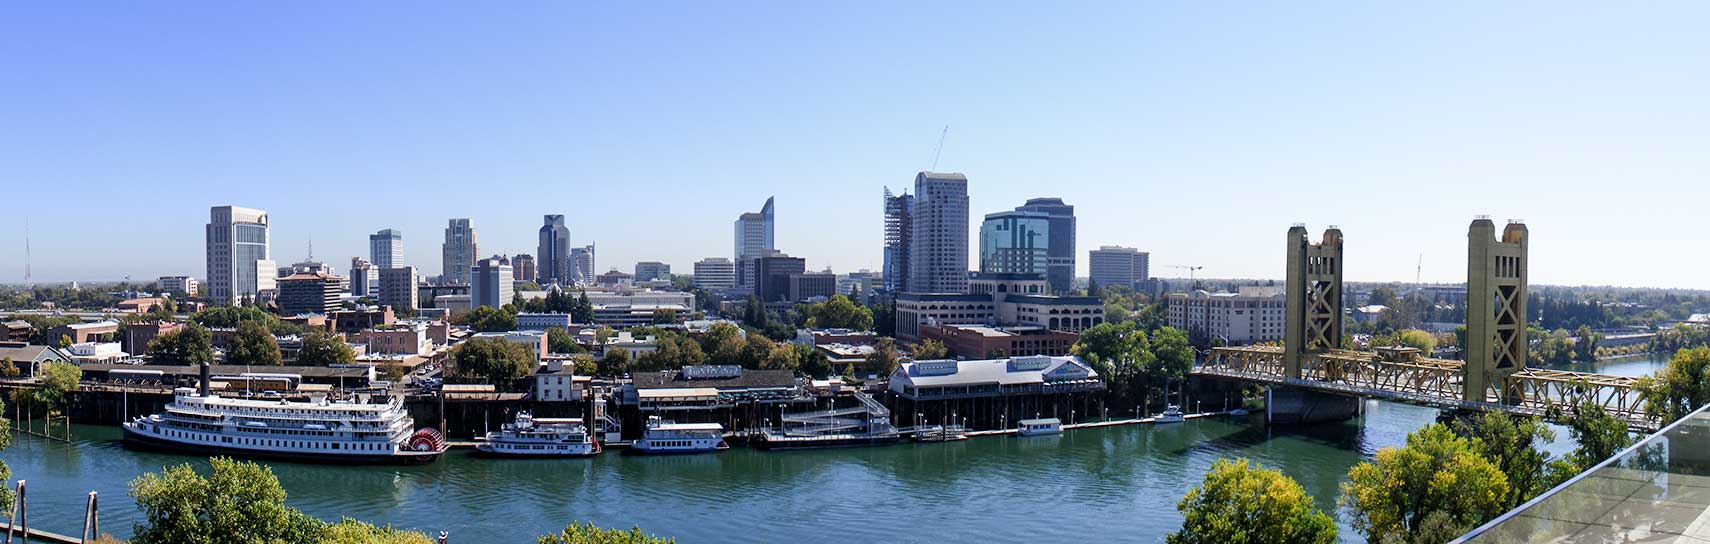 Satellite View and Map of the City of Sacramento, California